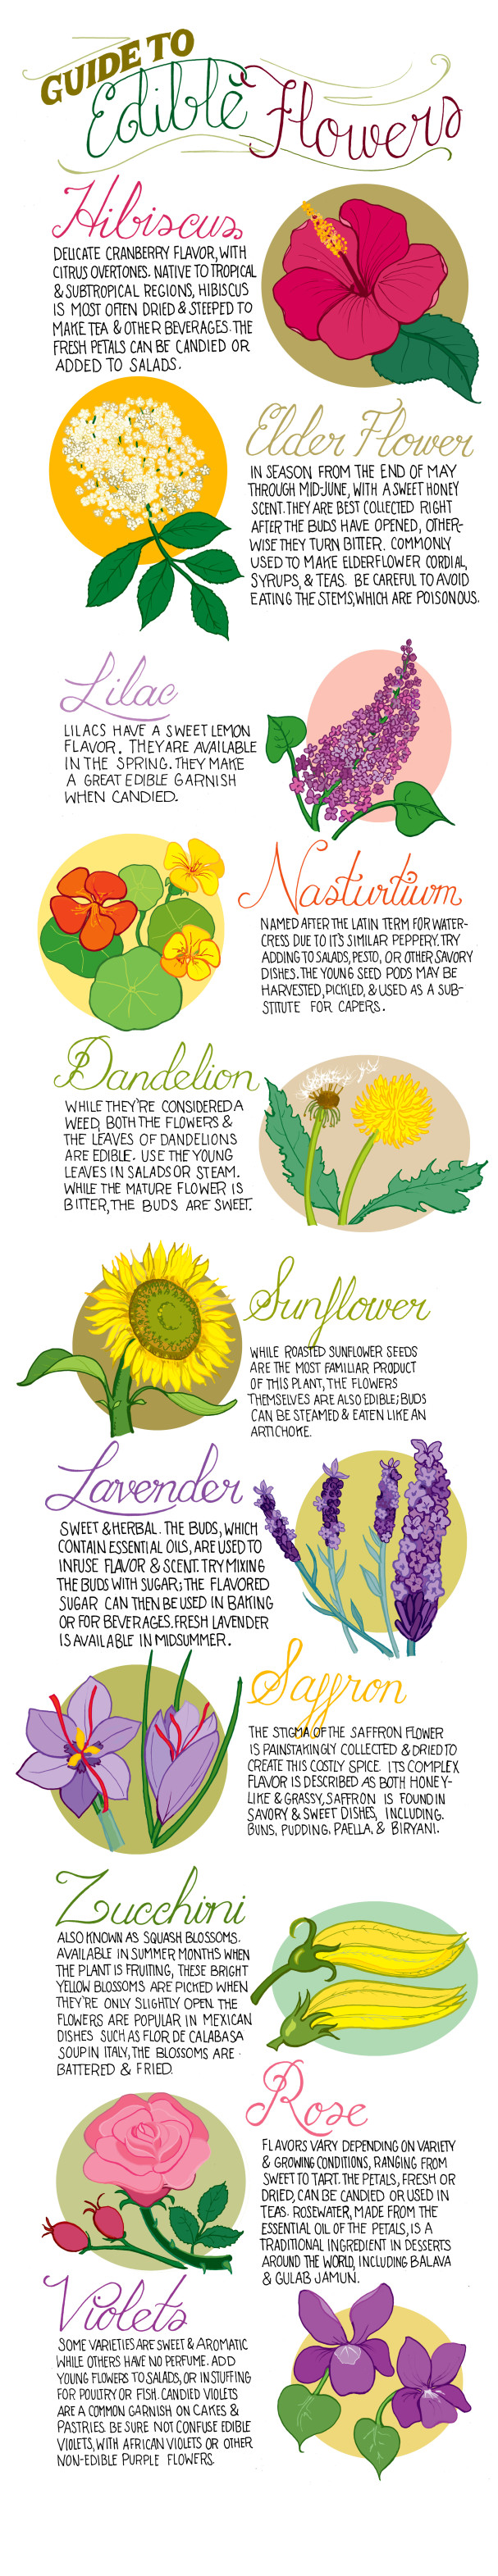 Edible Flowers Chart, Whats Cooking America